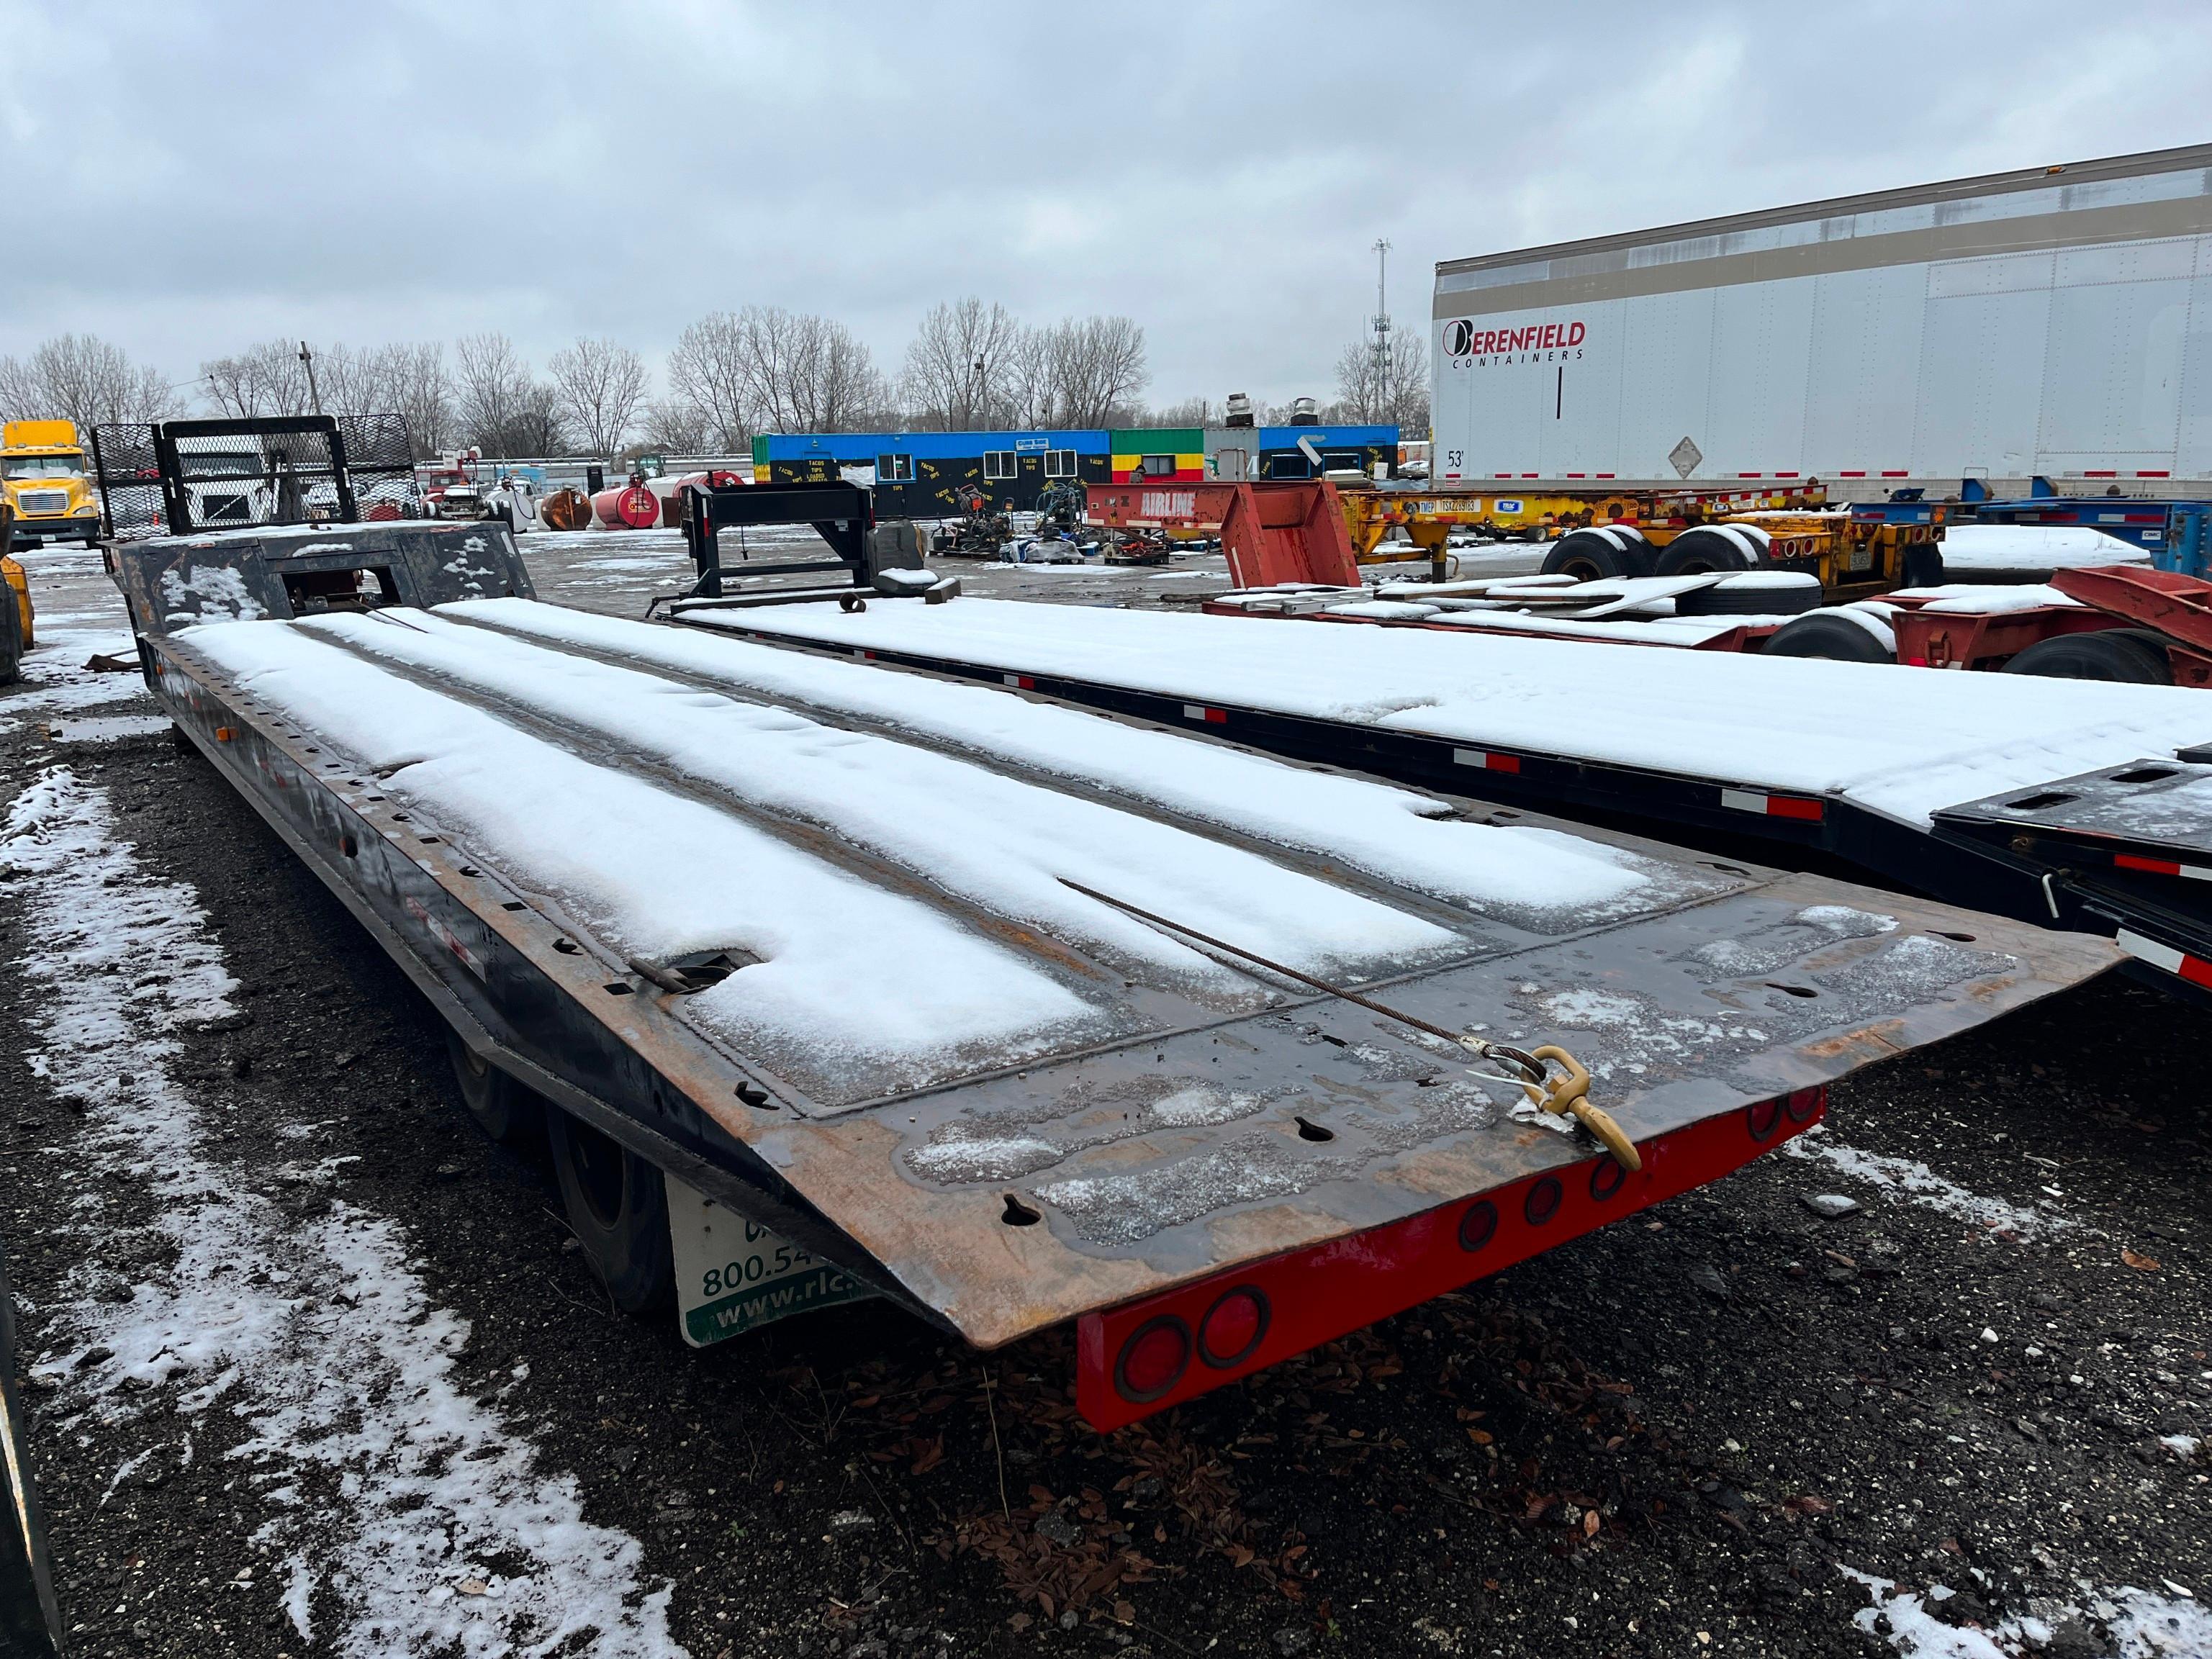 EQUIPMENT TRAILER VN:N/A equipped with 102in. x 37ft. main deck, winch, air ride suspension, steel